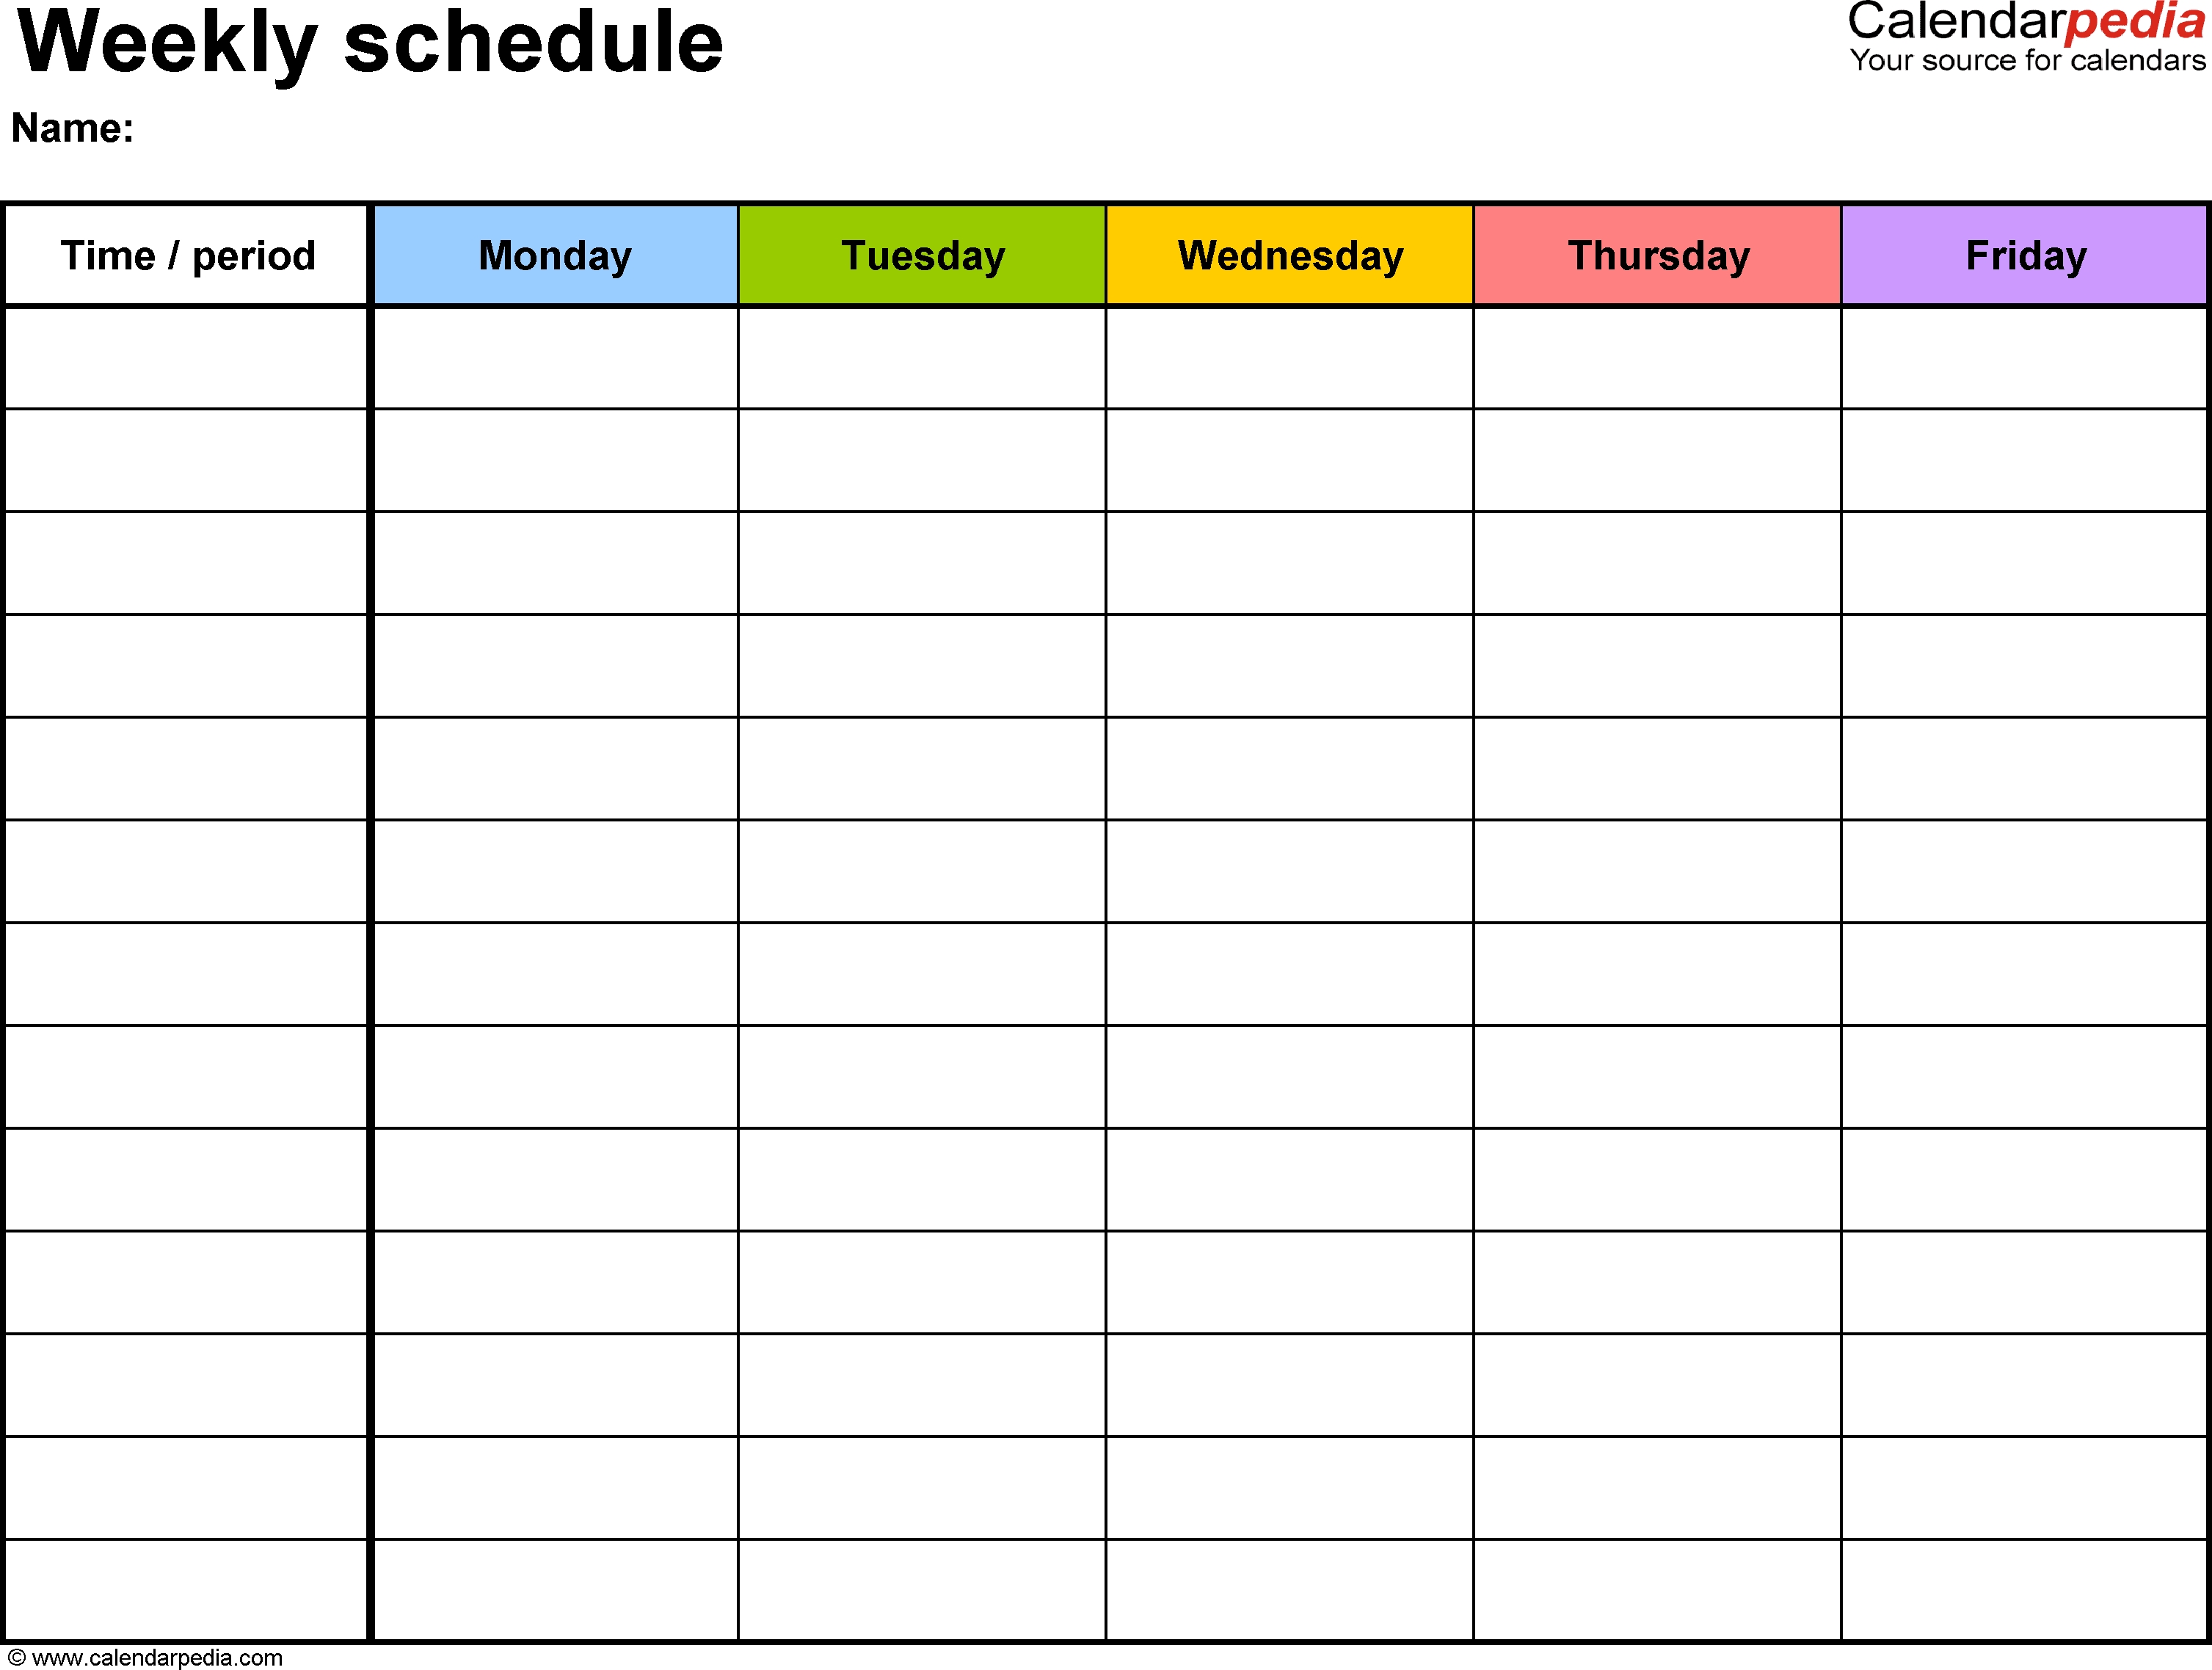 Free Weekly Schedule Templates For Word - 18 Templates Calendar Template Days Of The Week